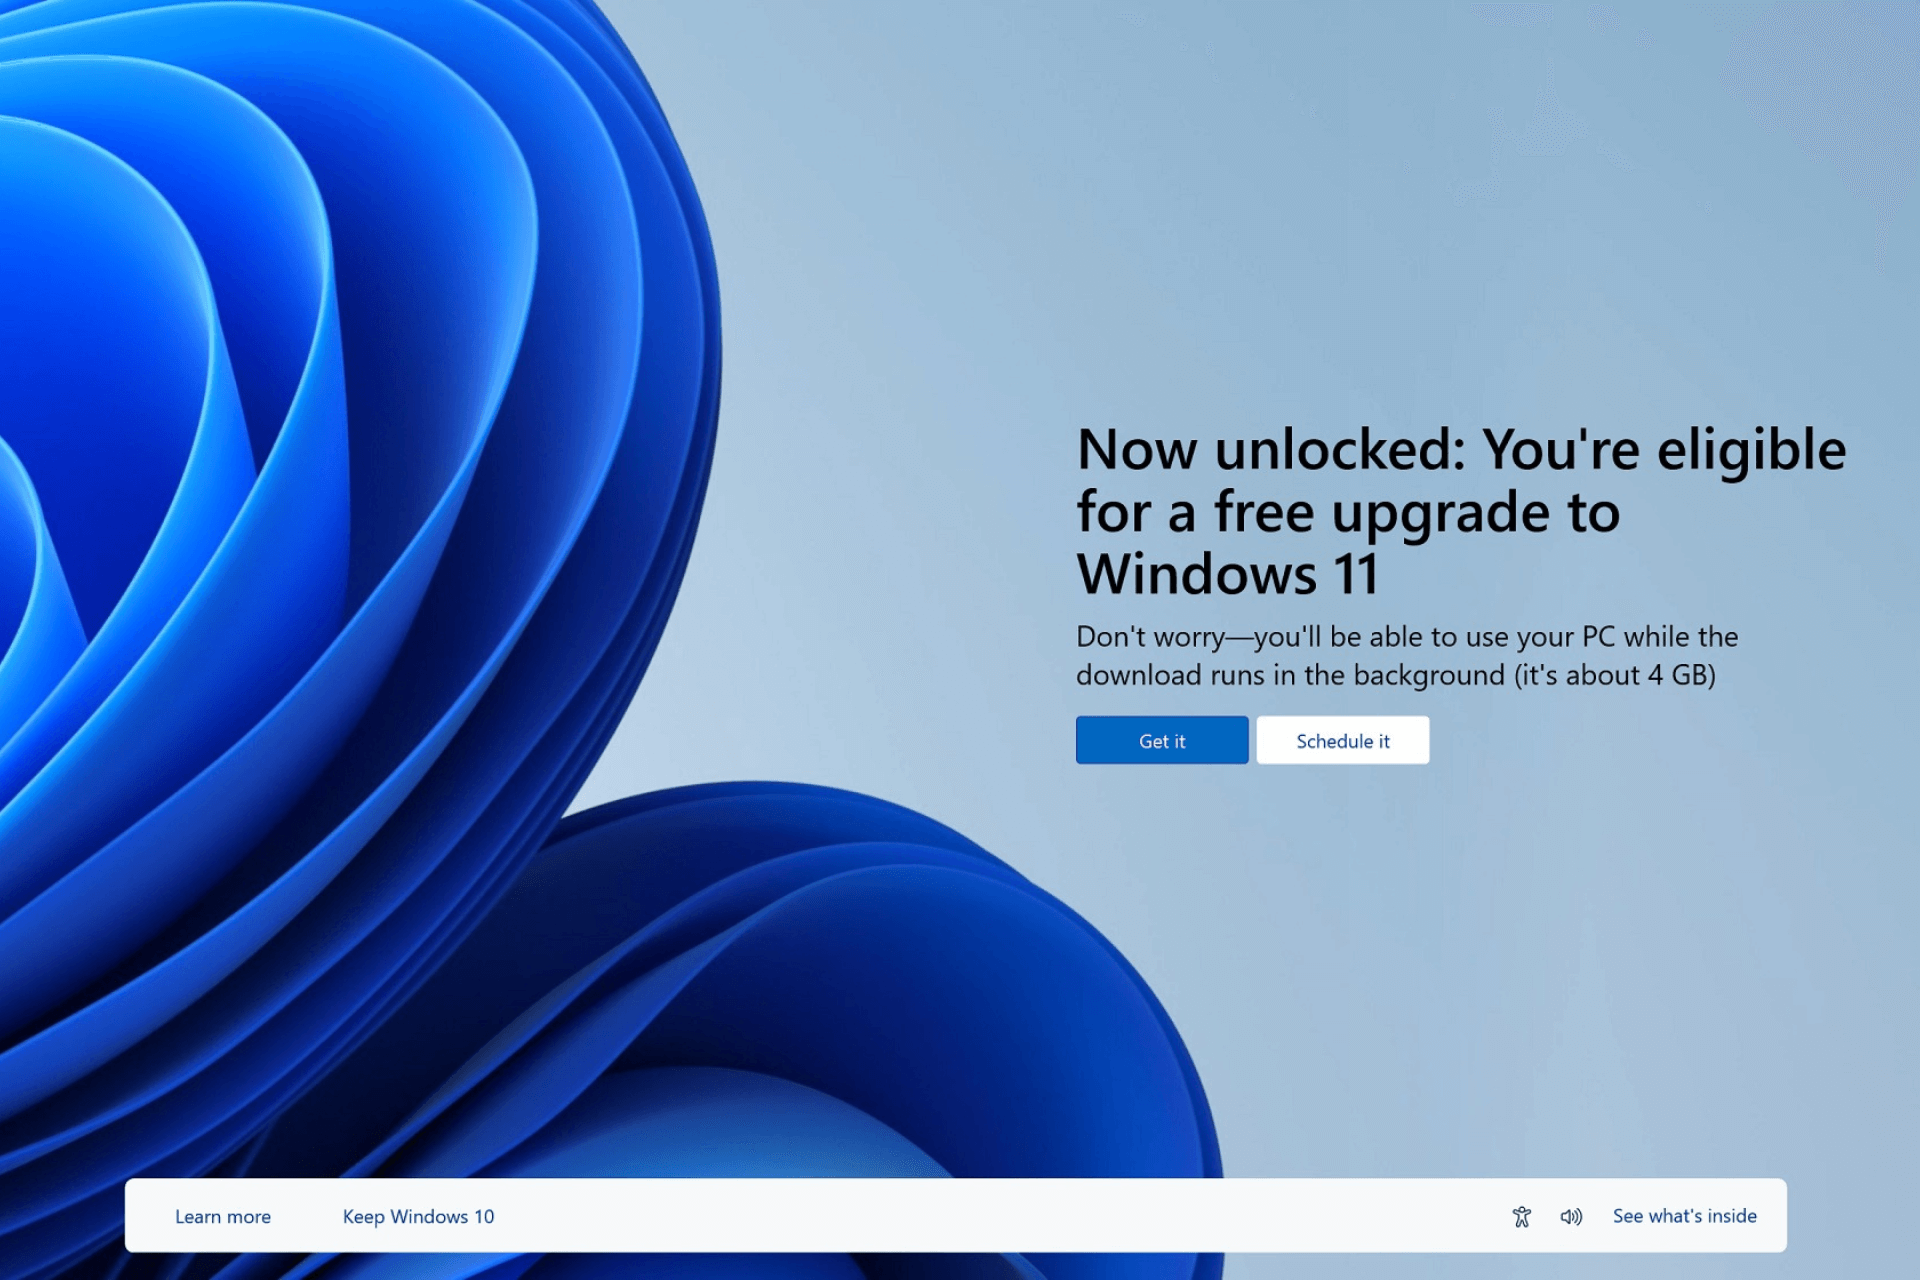 Microsoft Pushes Windows 11 with New Pop-ups